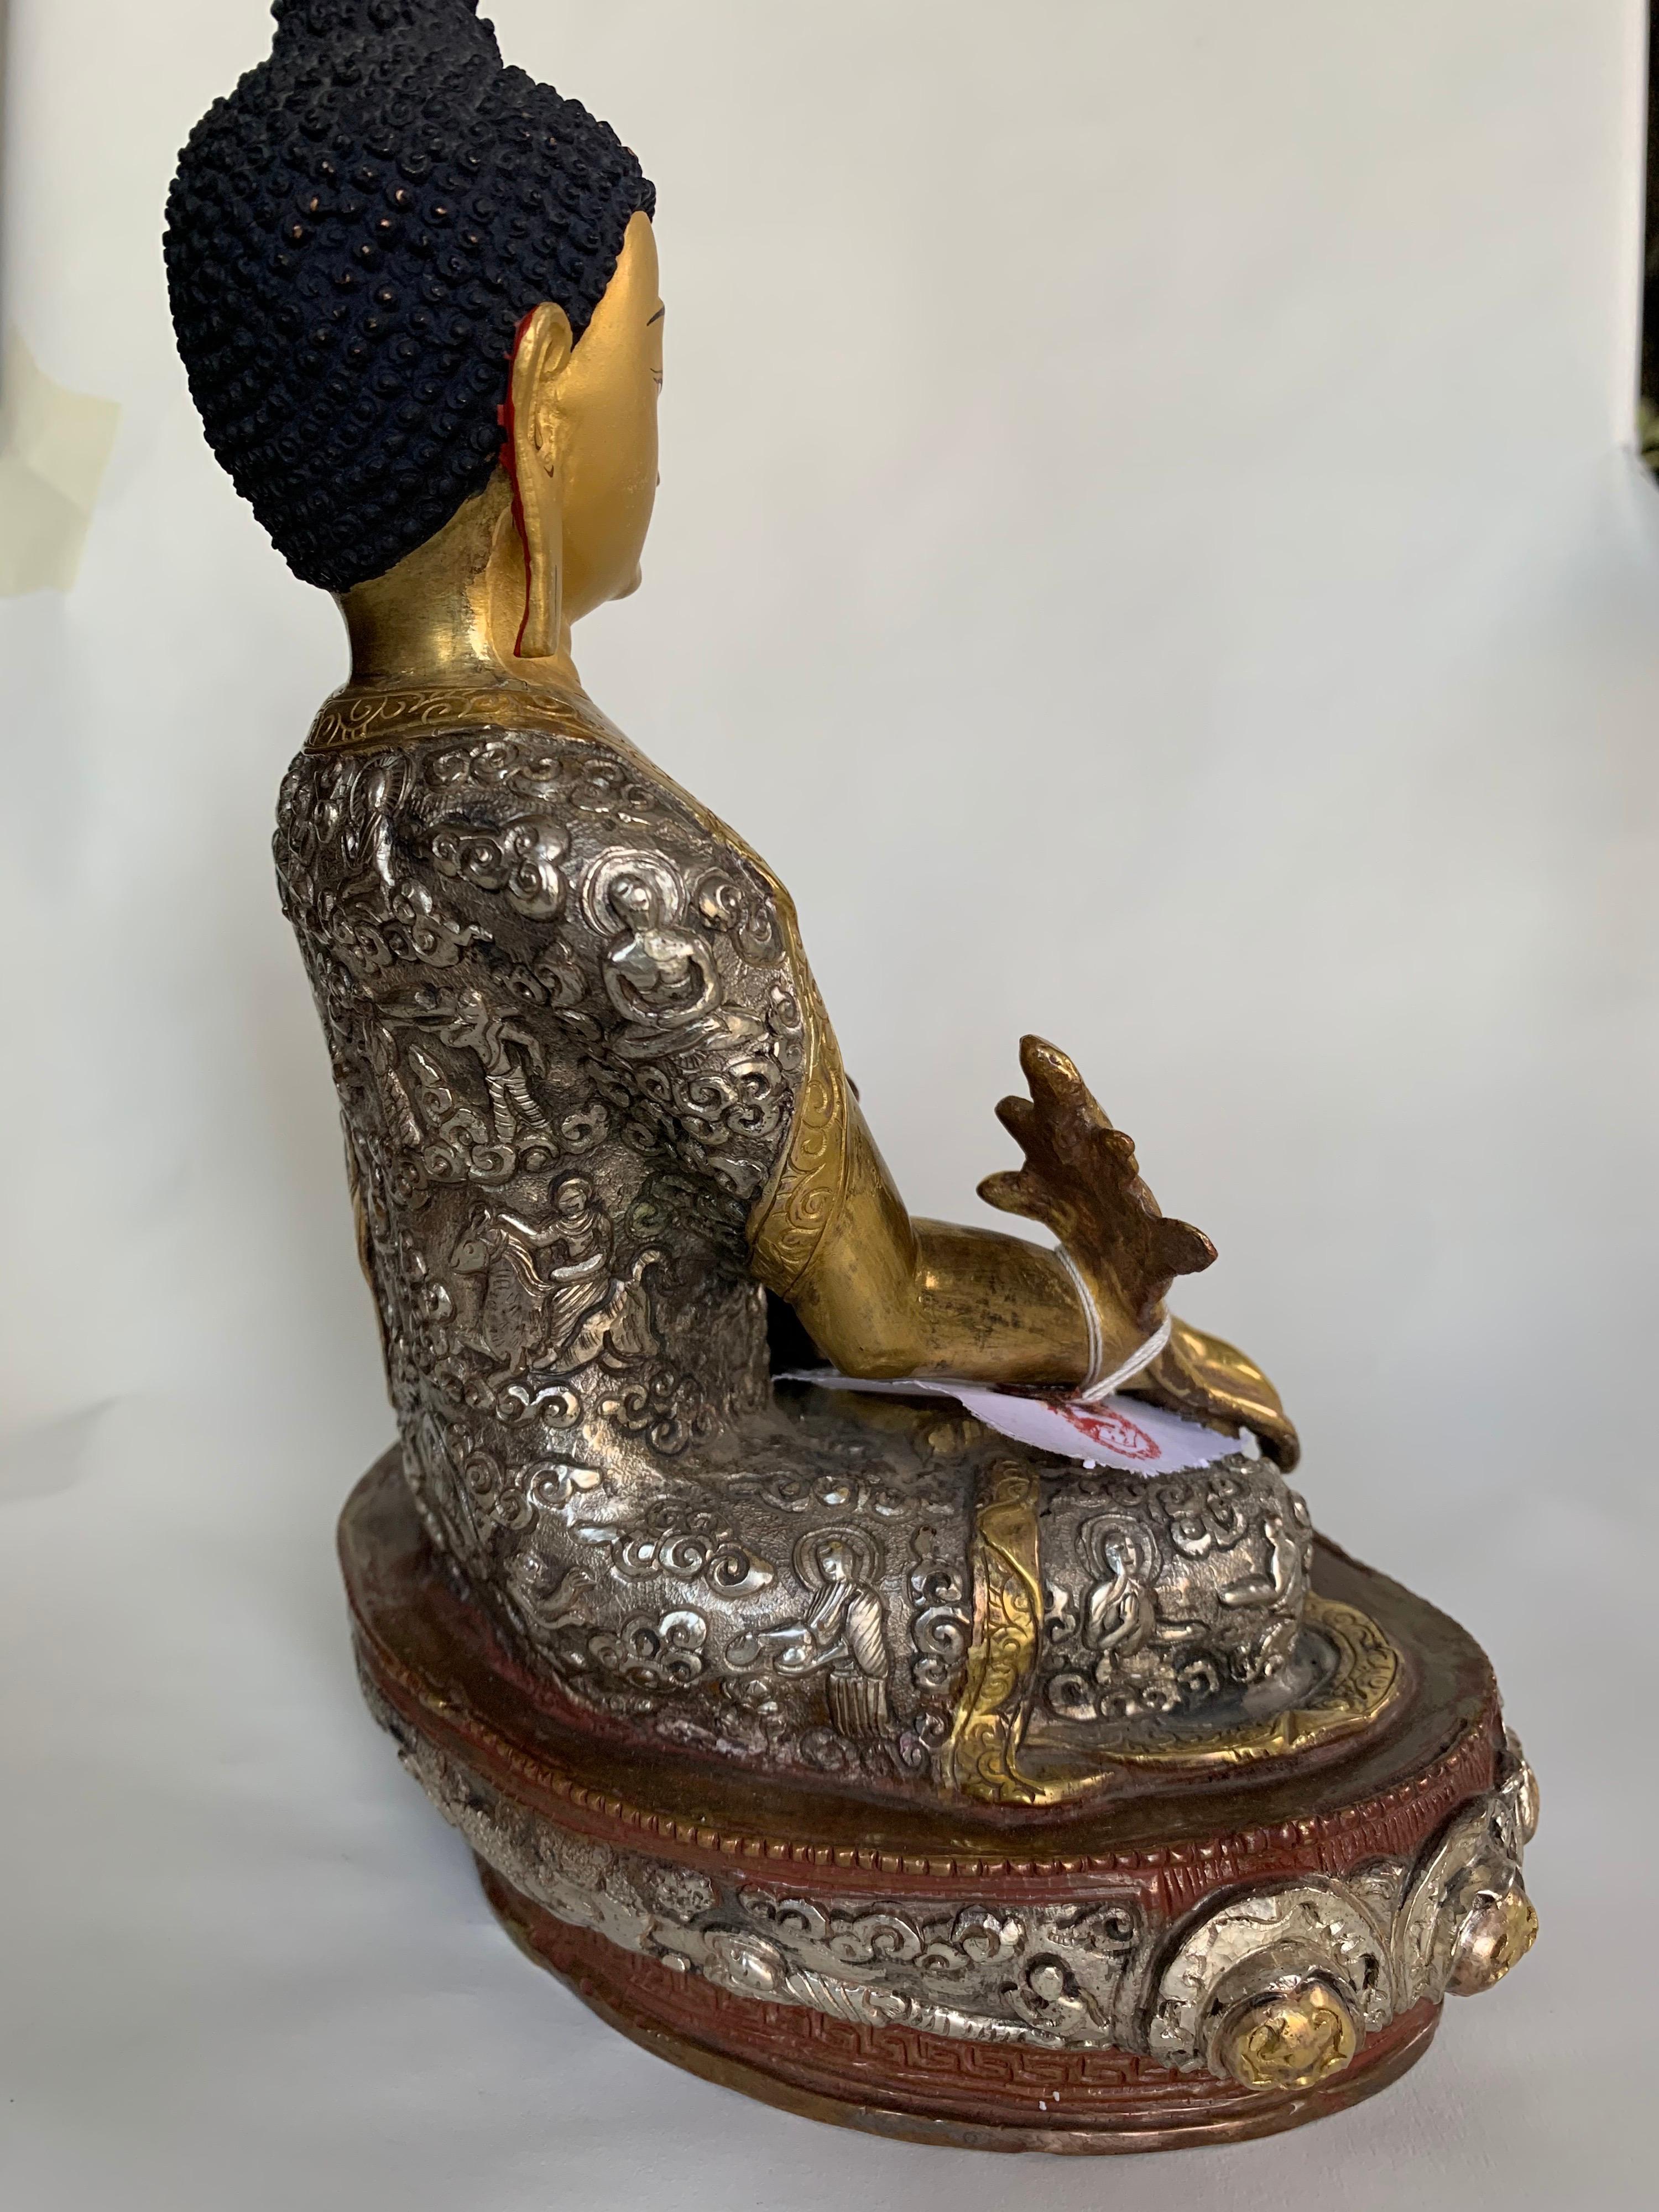 Medicine Buddha Statue 9.5 Inch with 24 Gold Handcrafted by Lost Wax Process - Gray Figurative Sculpture by Unknown